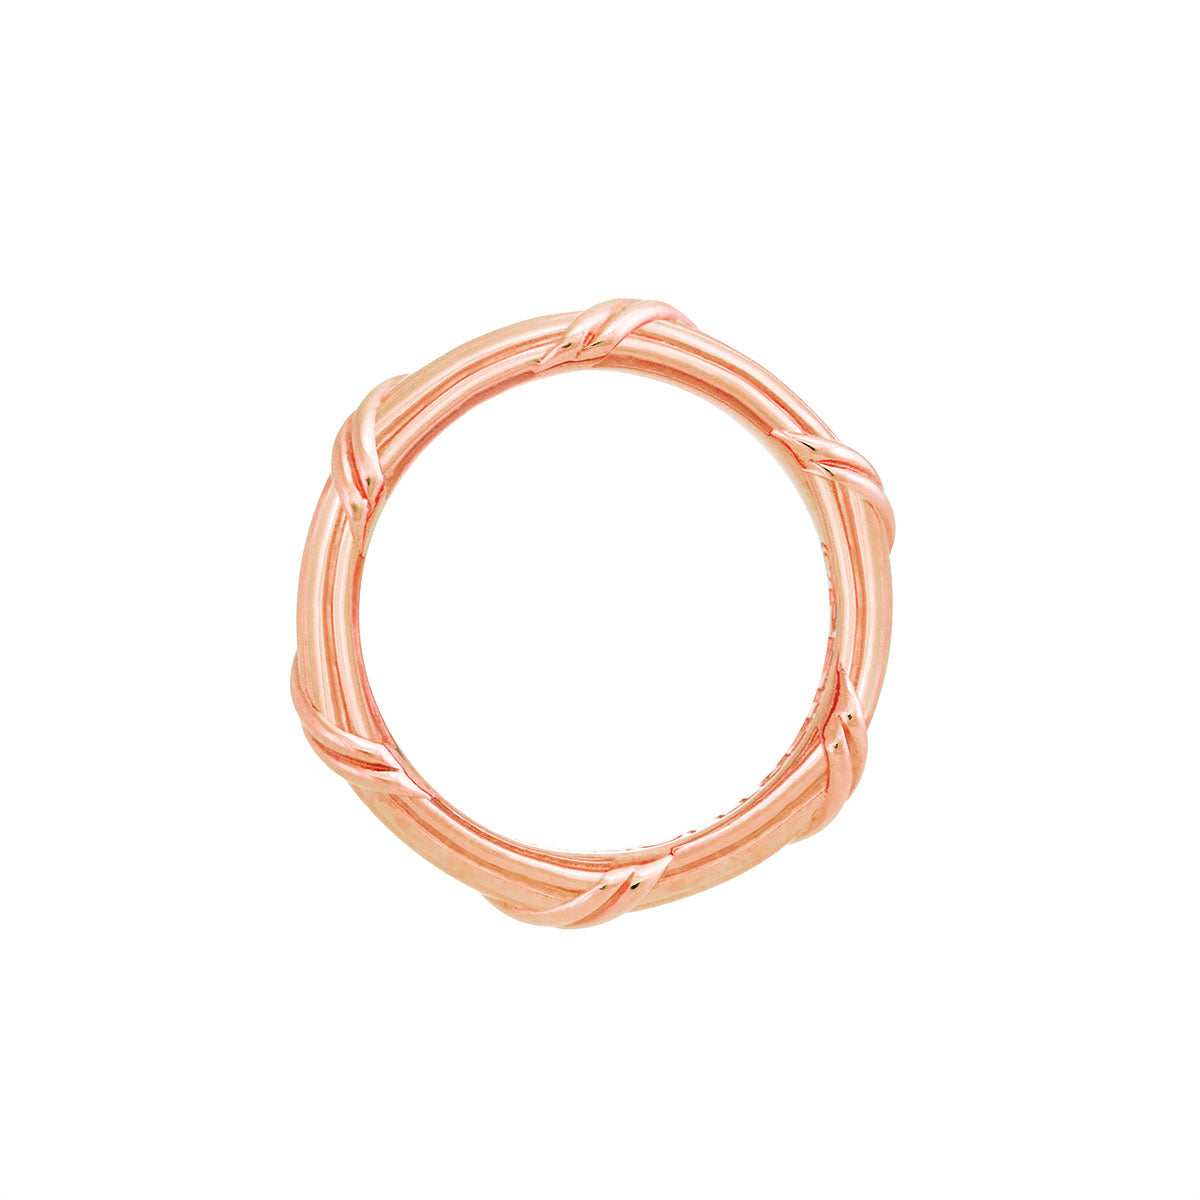 Heritage Eternity Band in 18K rose gold 3 mm Sizes 10 - 13